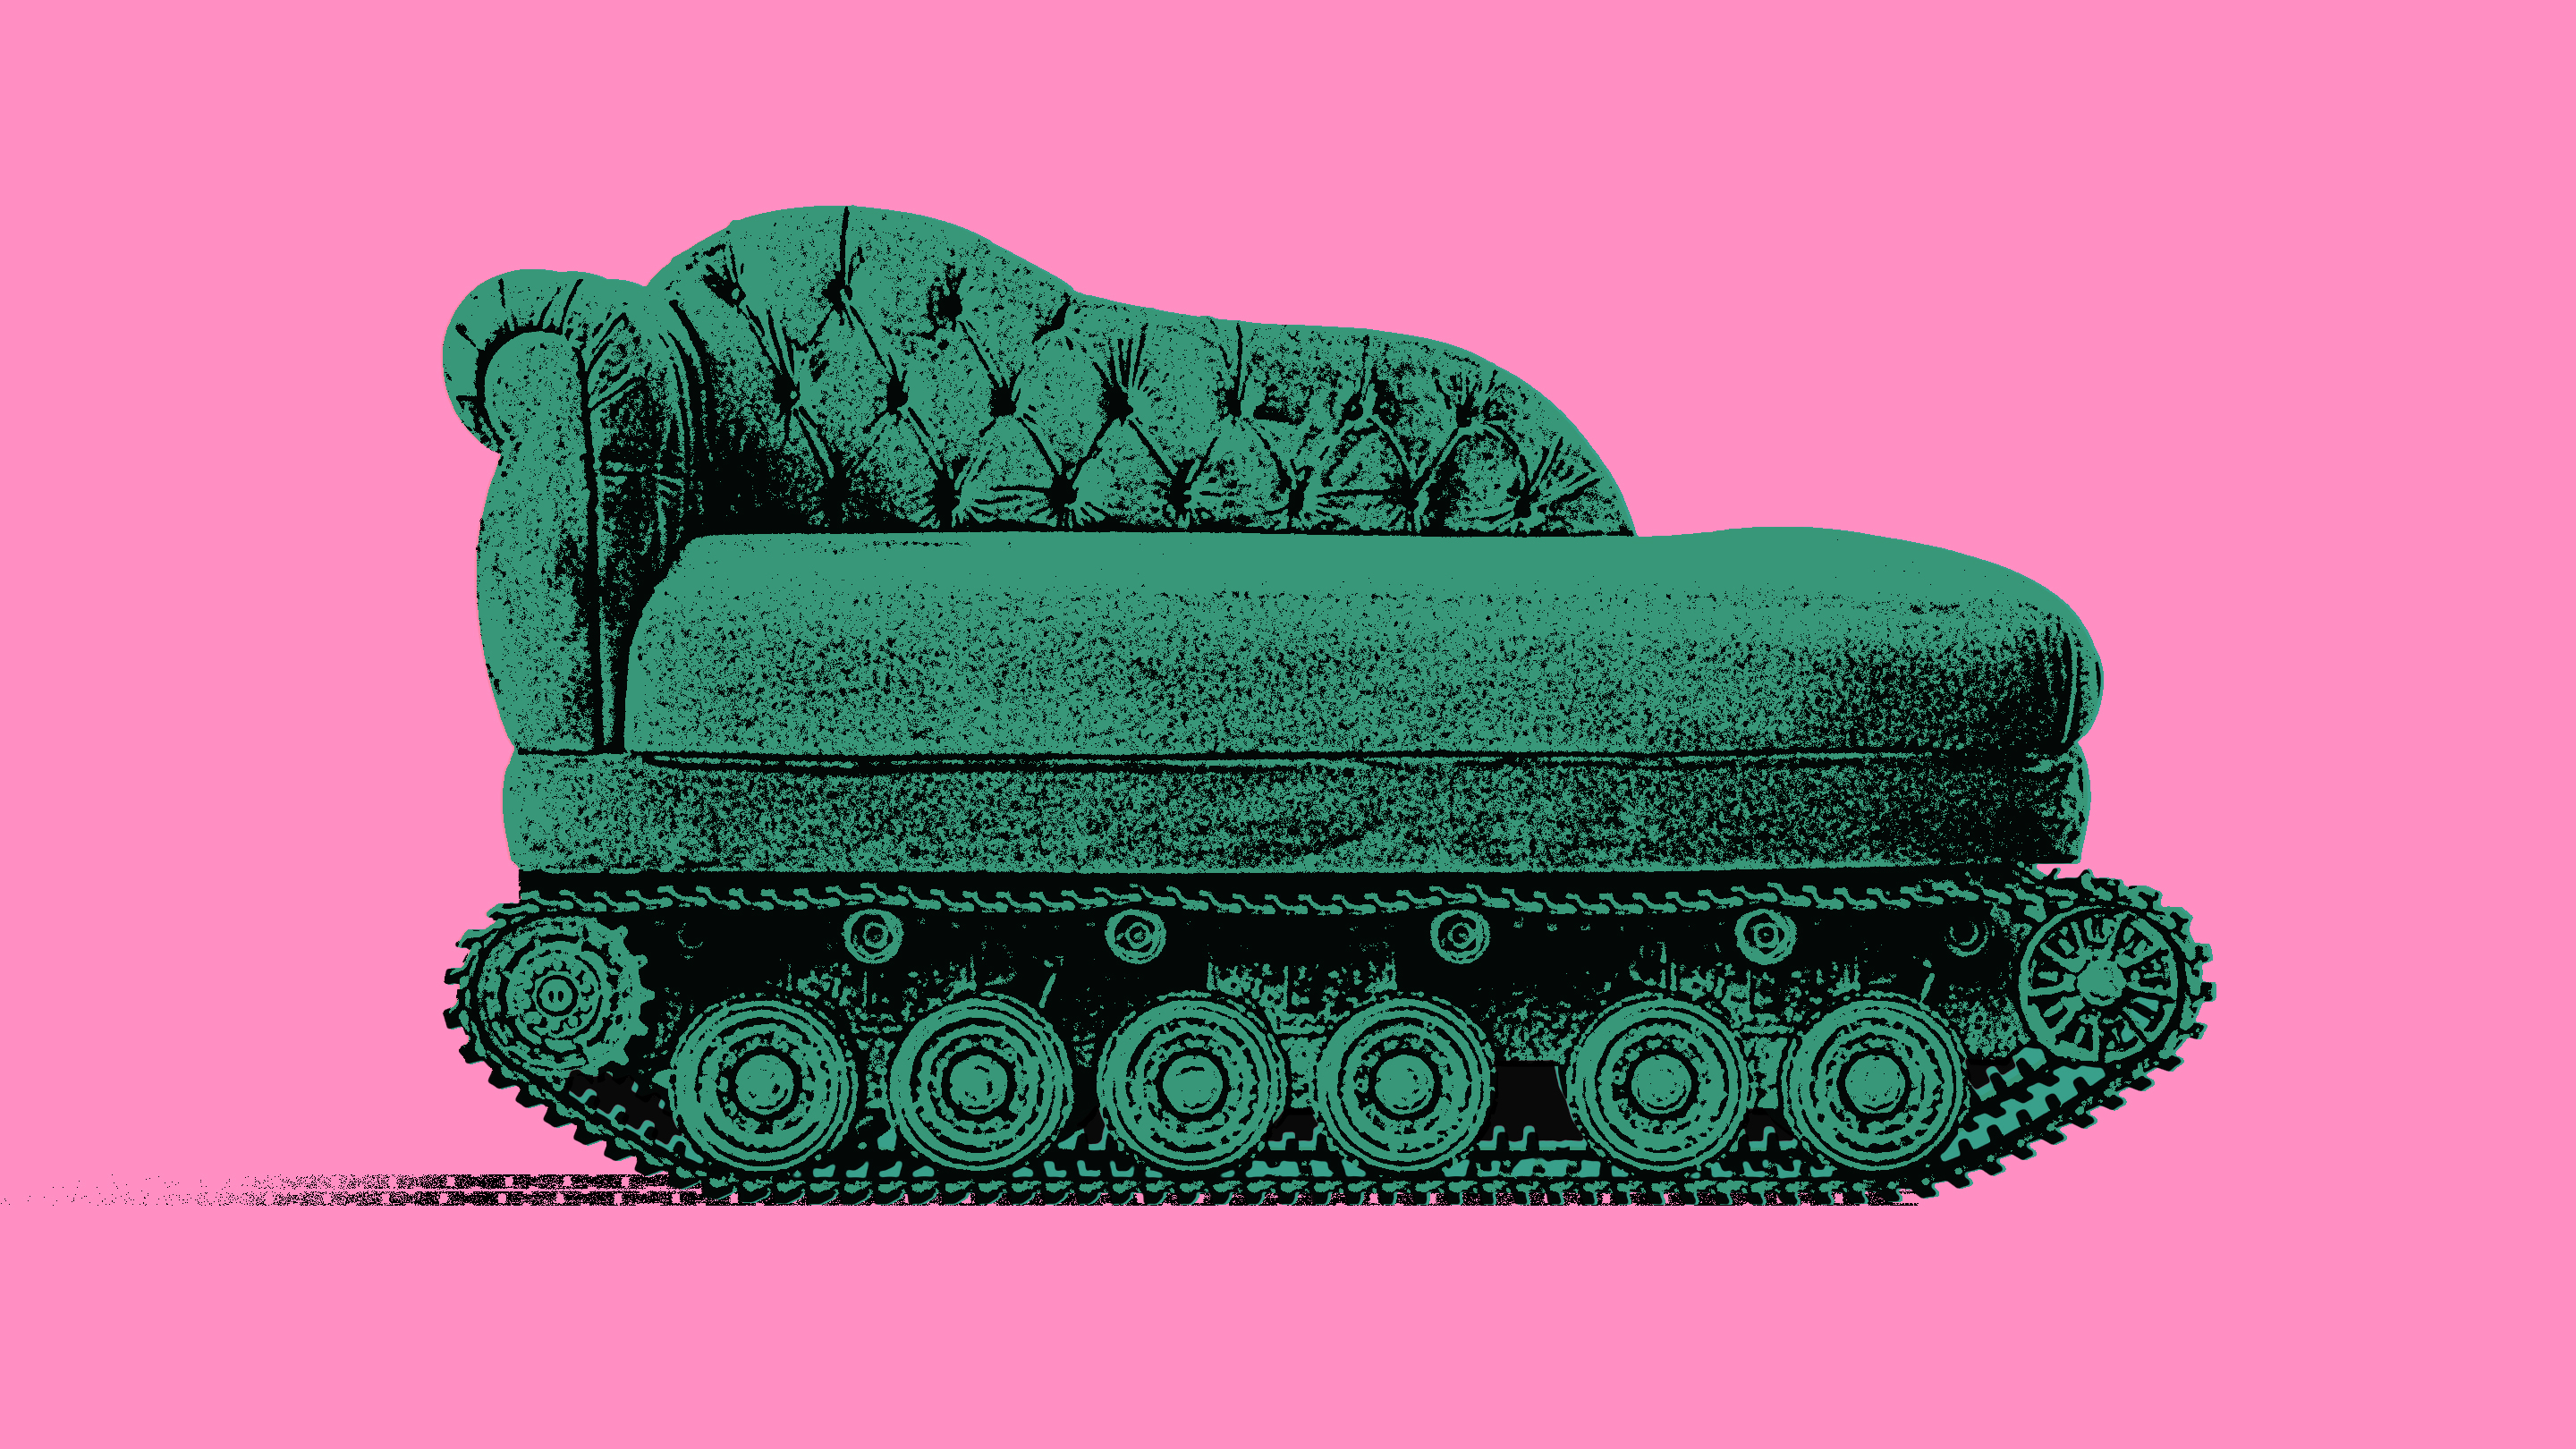 A green chaise on wheels that looks like a tank, in front of a pink background